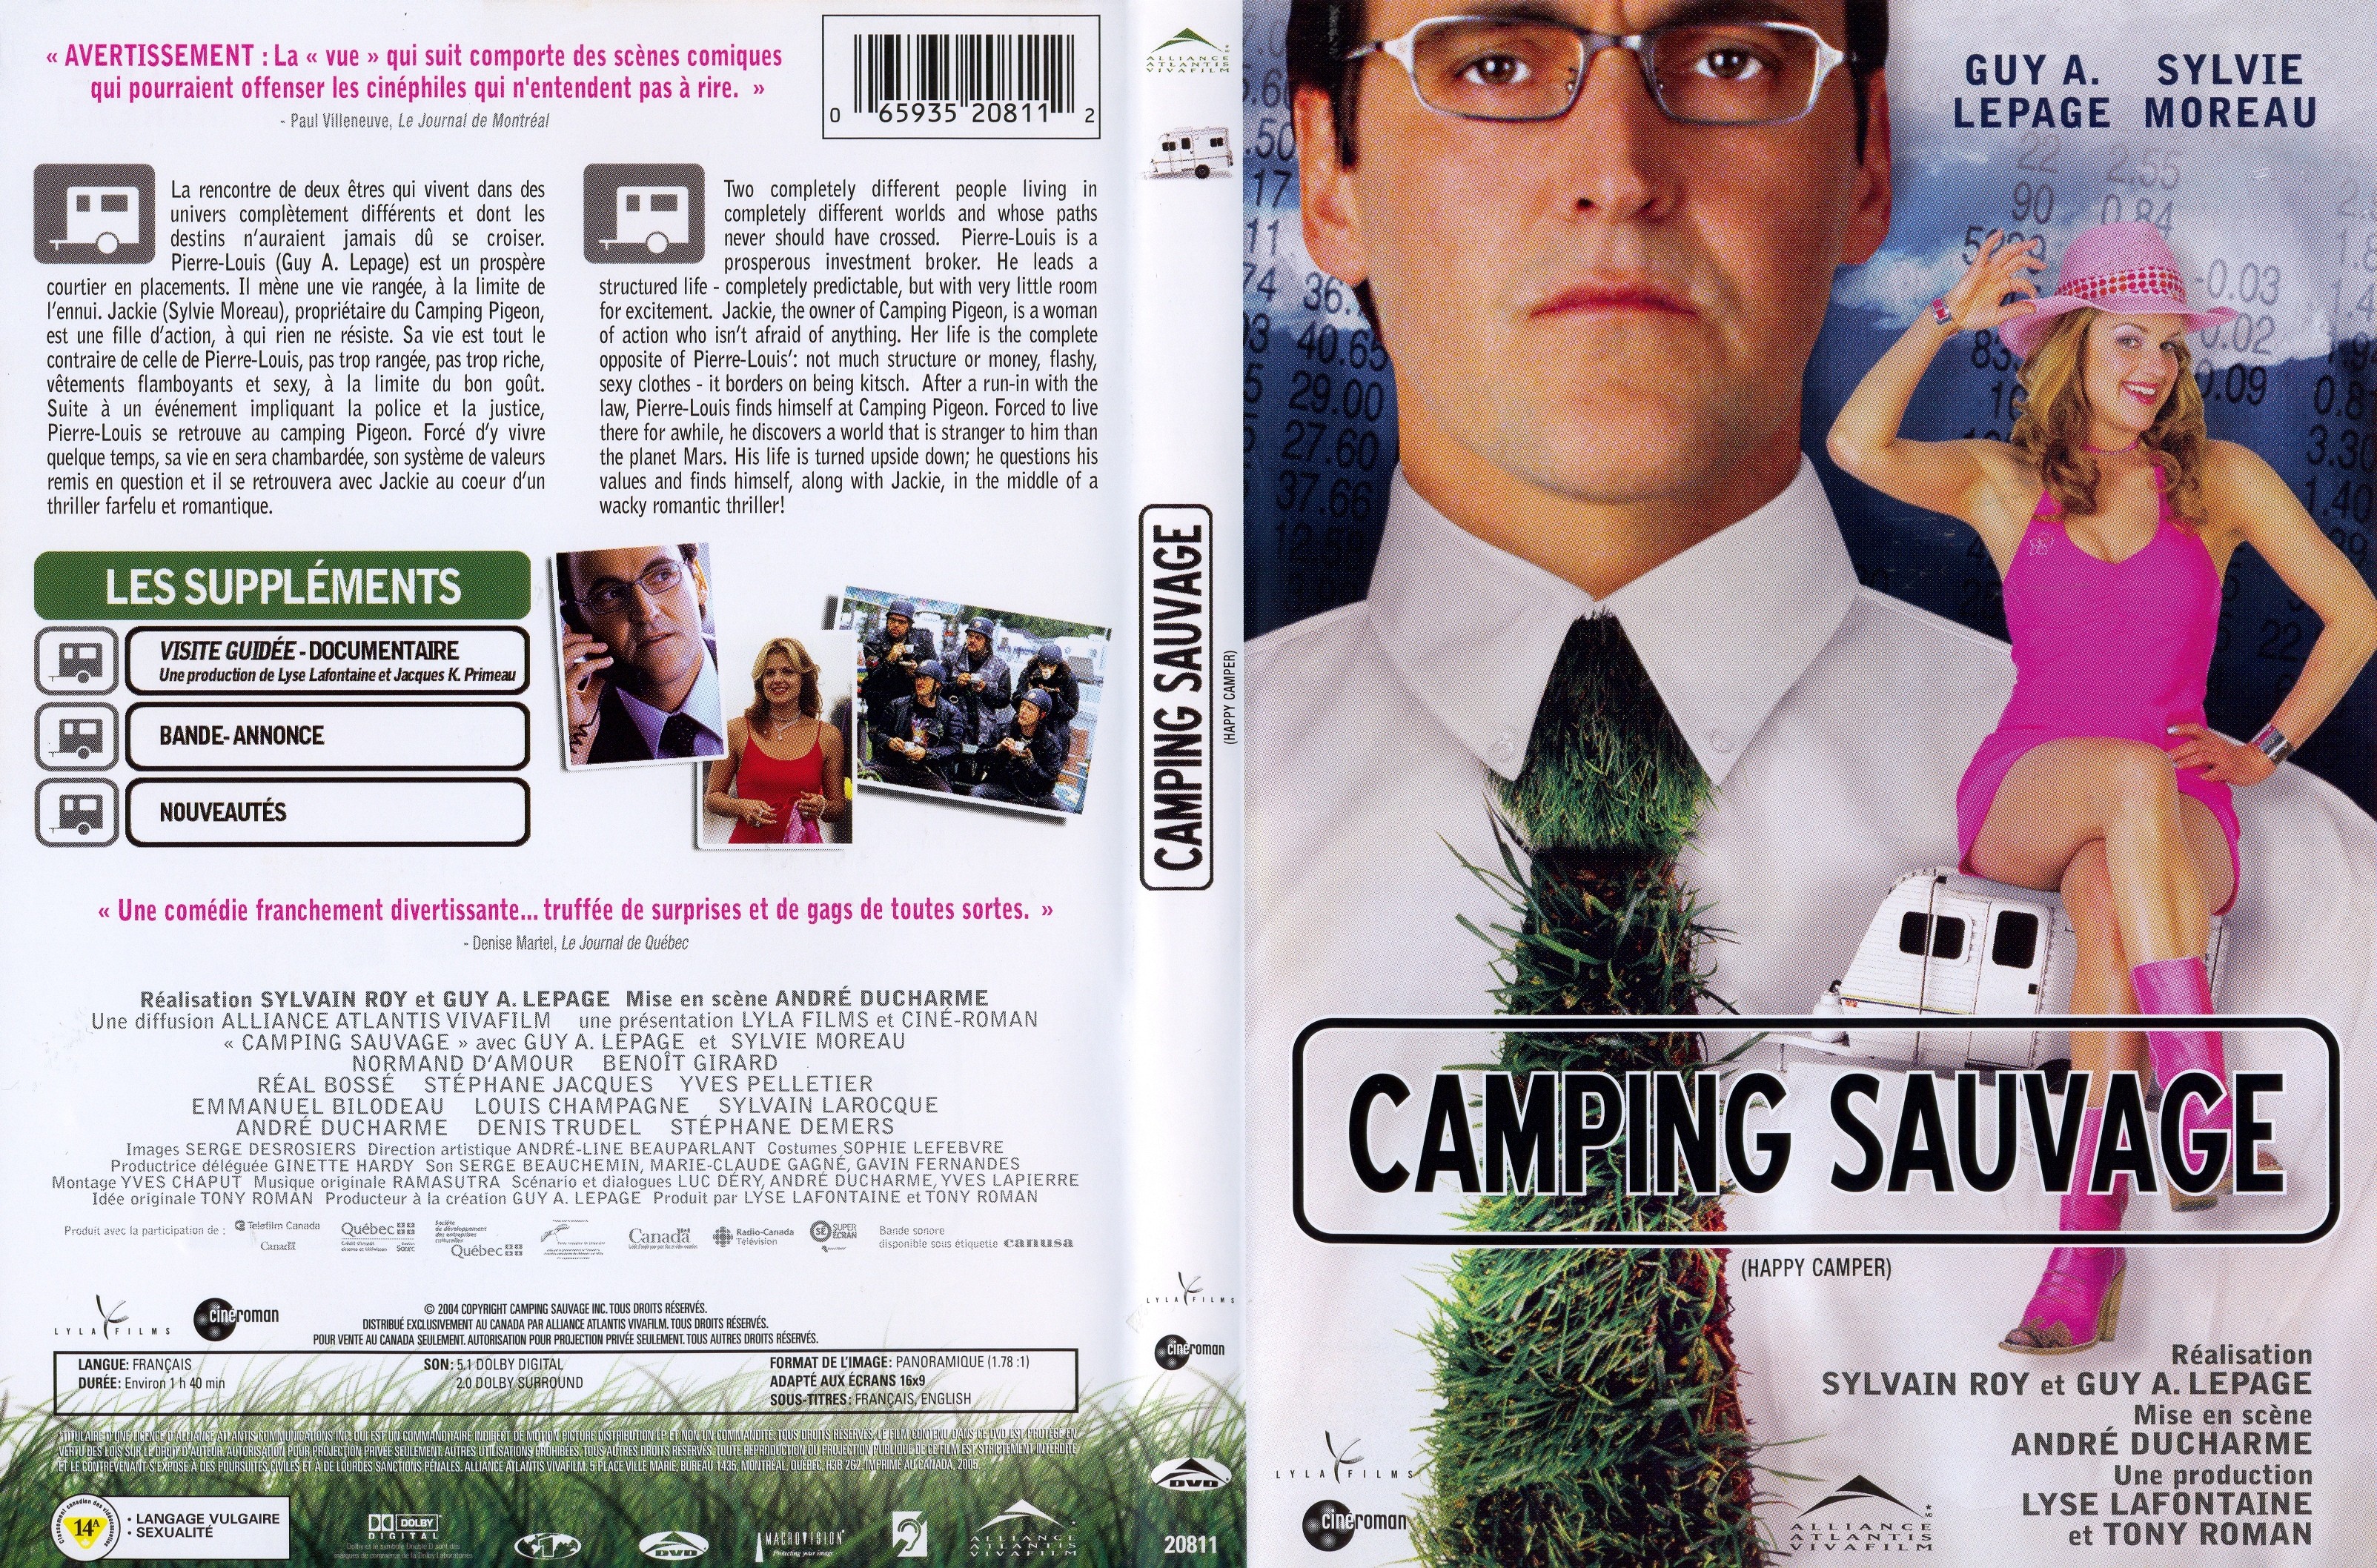 Jaquette DVD Camping sauvage